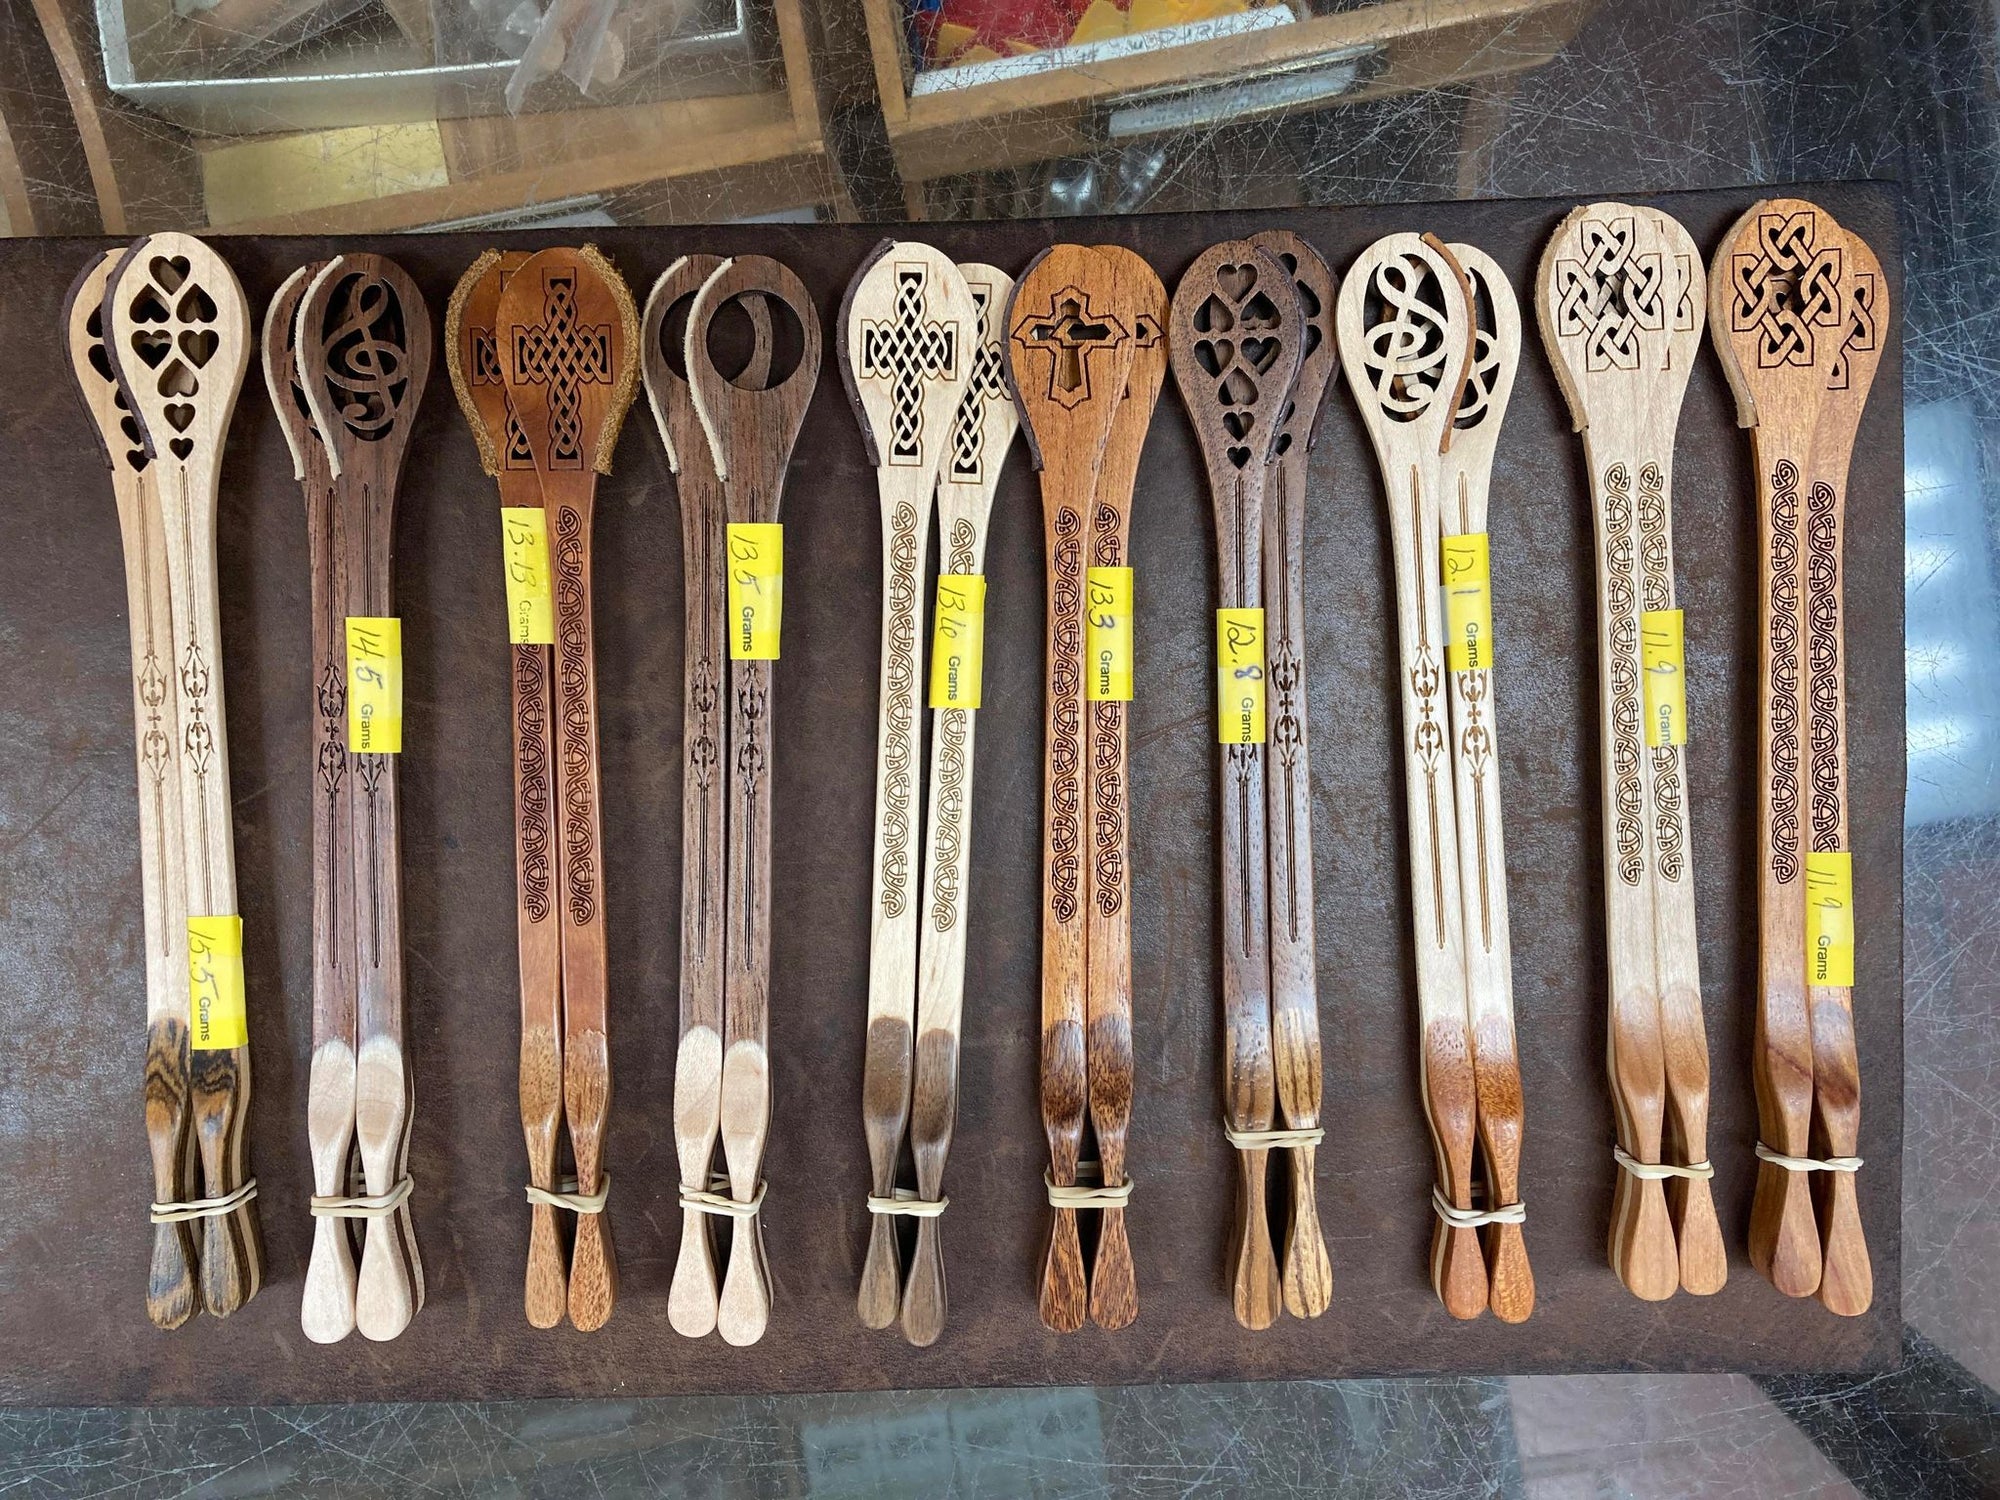 A collection of twelve intricately carved Master Works Hammer Dulcimer Hammers with various designs displayed on a wooden surface, each with a yellow price tag.